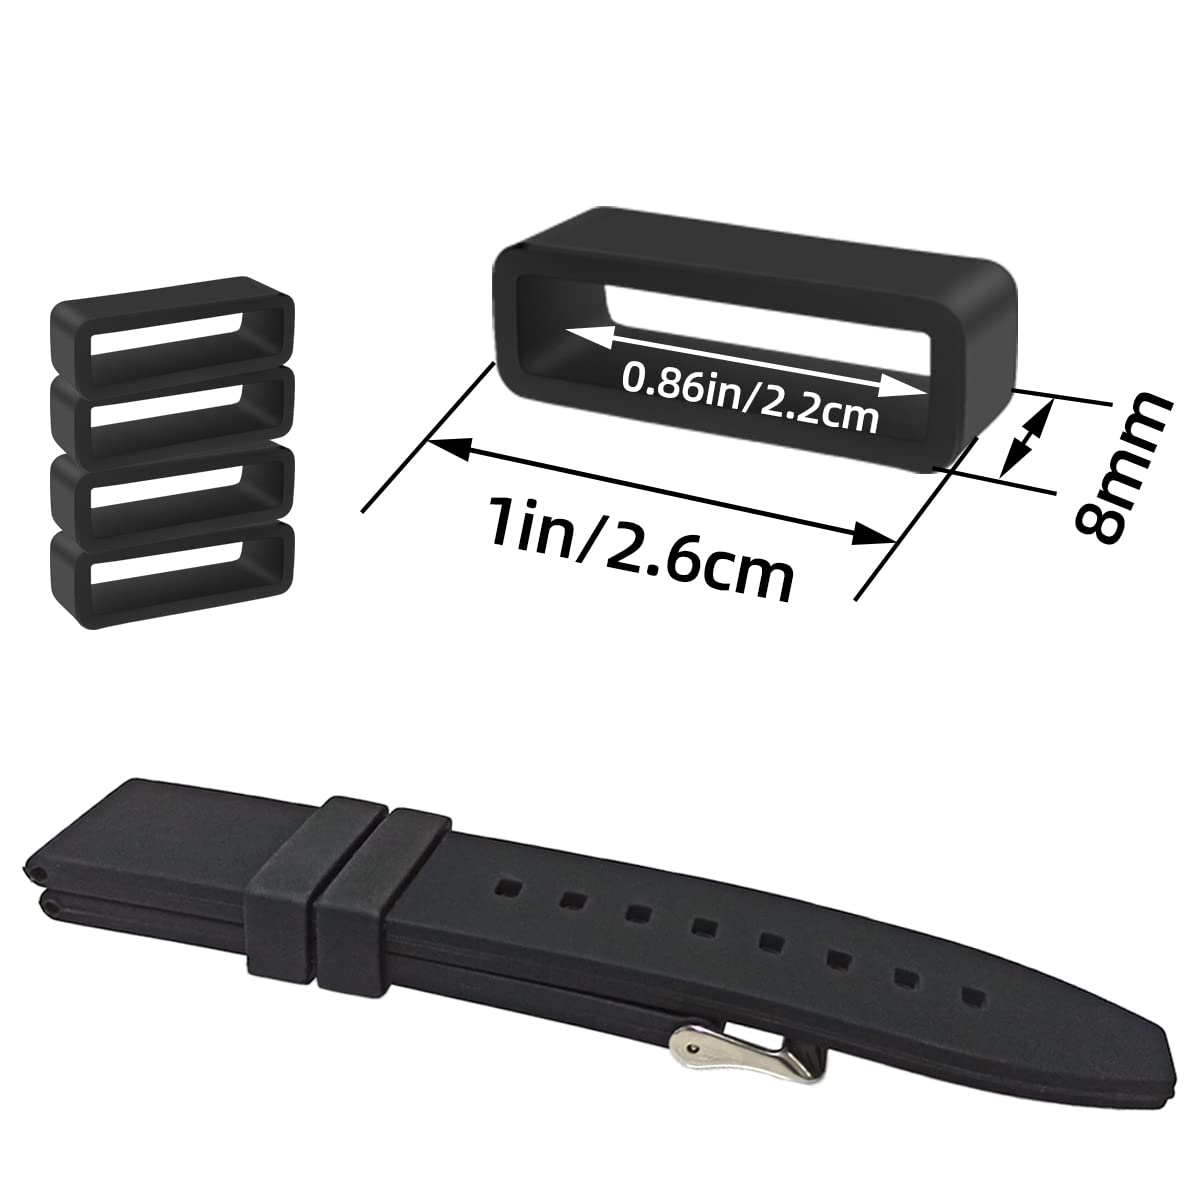 6 Pcs Watch Band Loop Holder Keeper for Resin Belt, Replacement Fastener Rings for Silicone Leather Rubber Watch Strap, Durable Fastener Retainer Size(22mm)